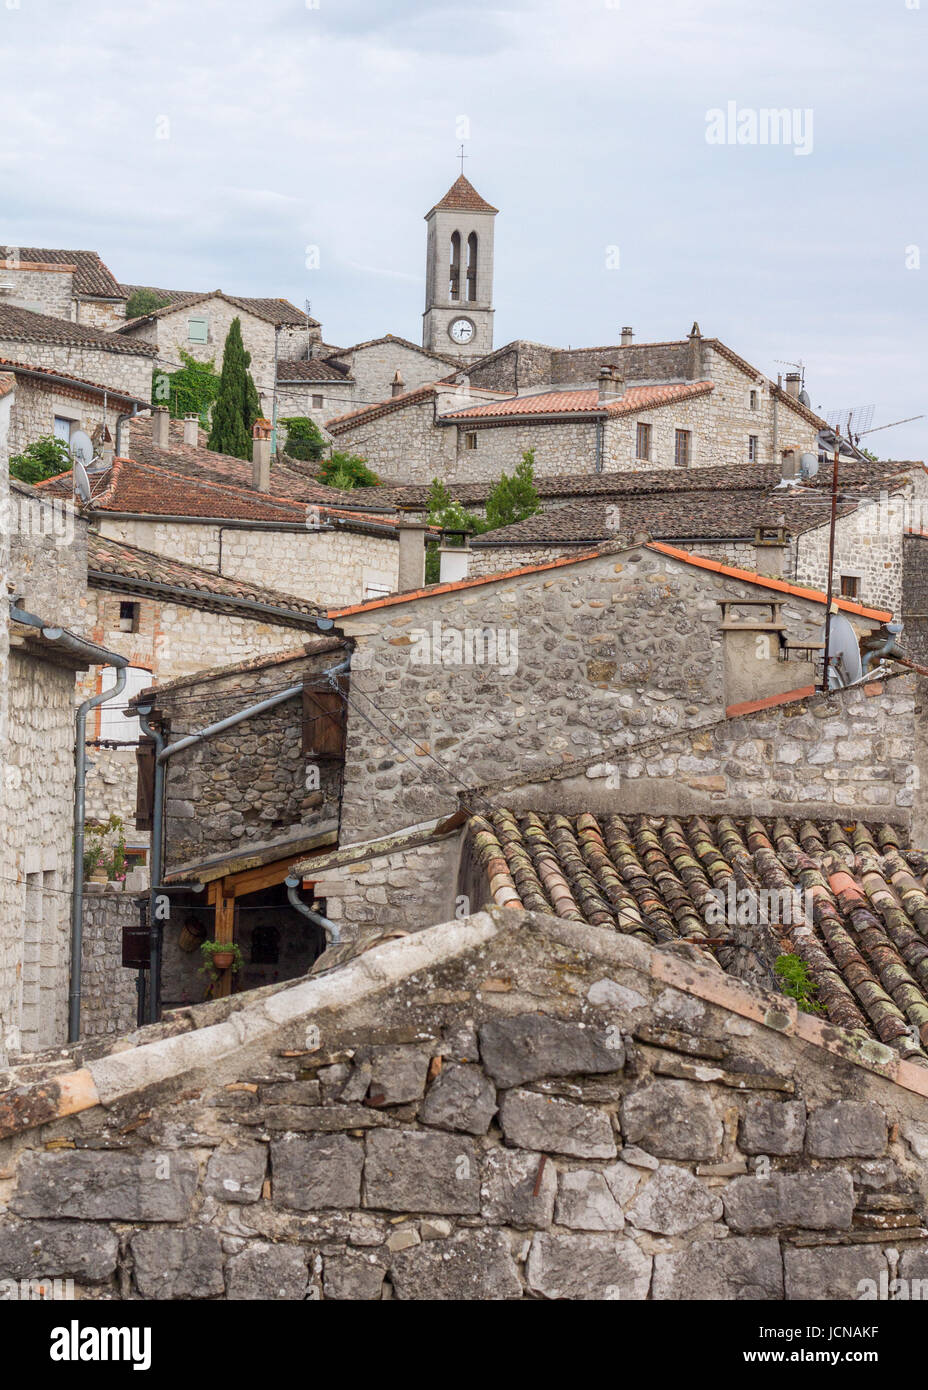 Medieval stone town. South of France. Stock Photo